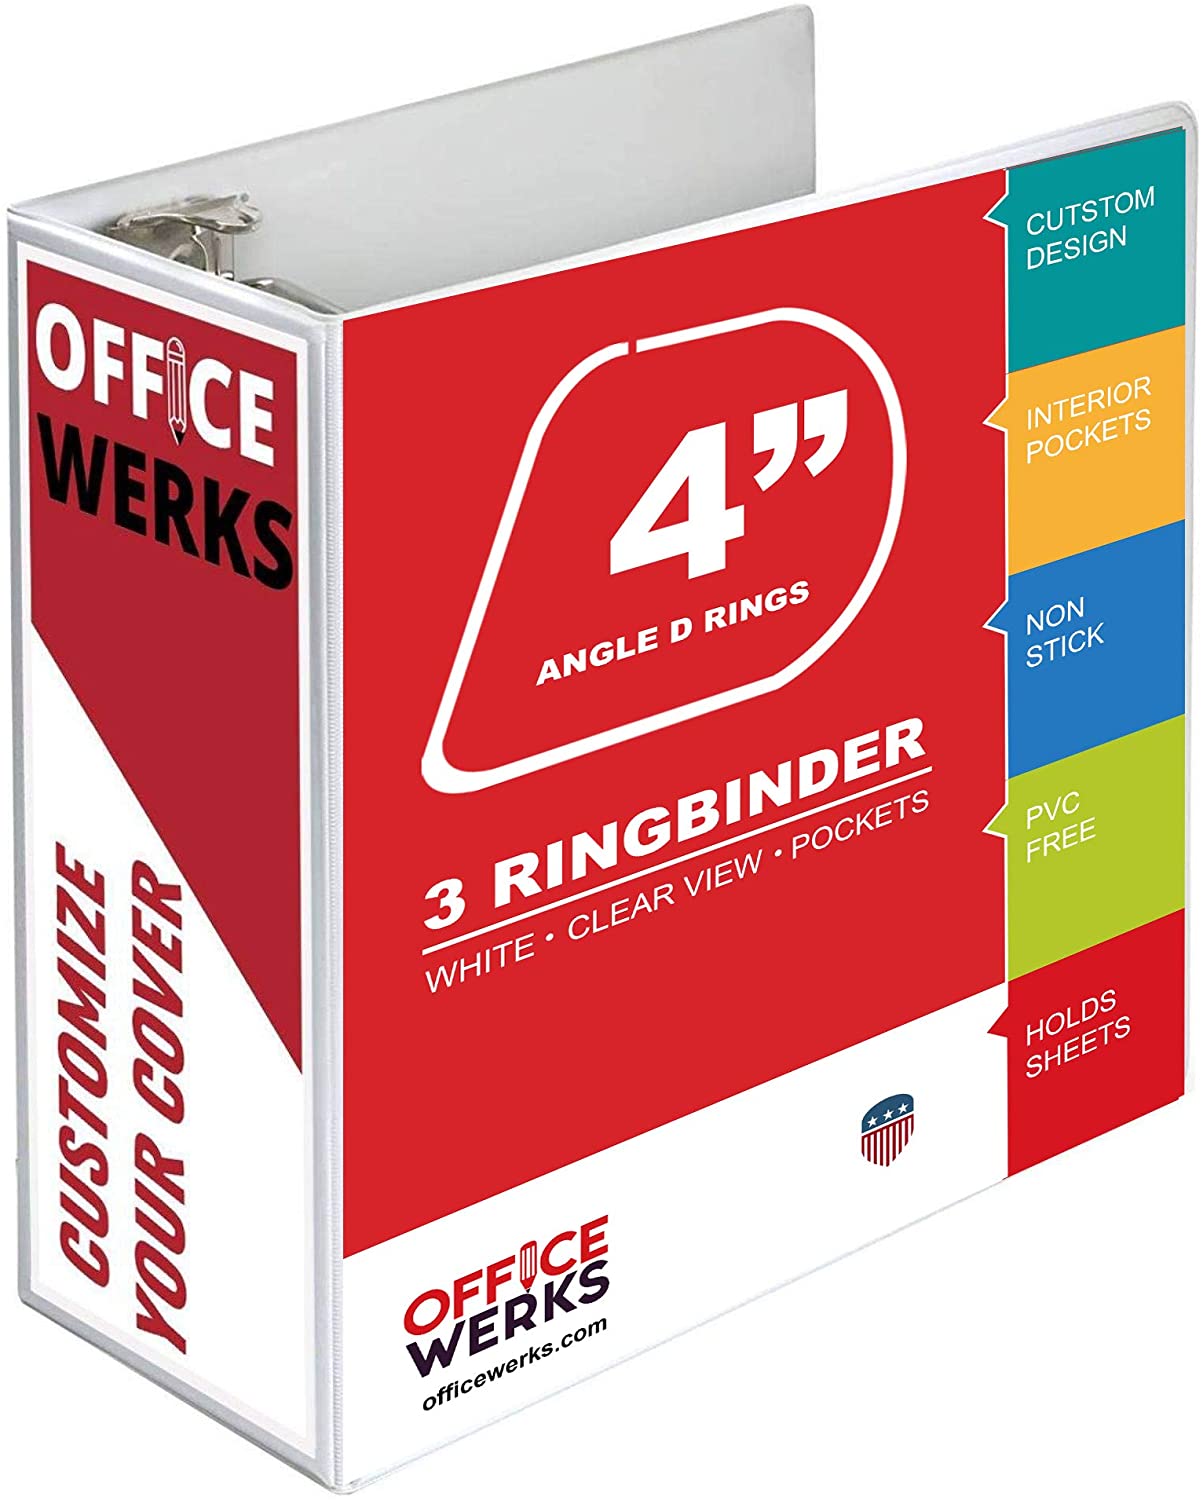 3 Ring Binder, 4 inch Angle D-Rings, White, Clear View, Pockets - 2 Pack